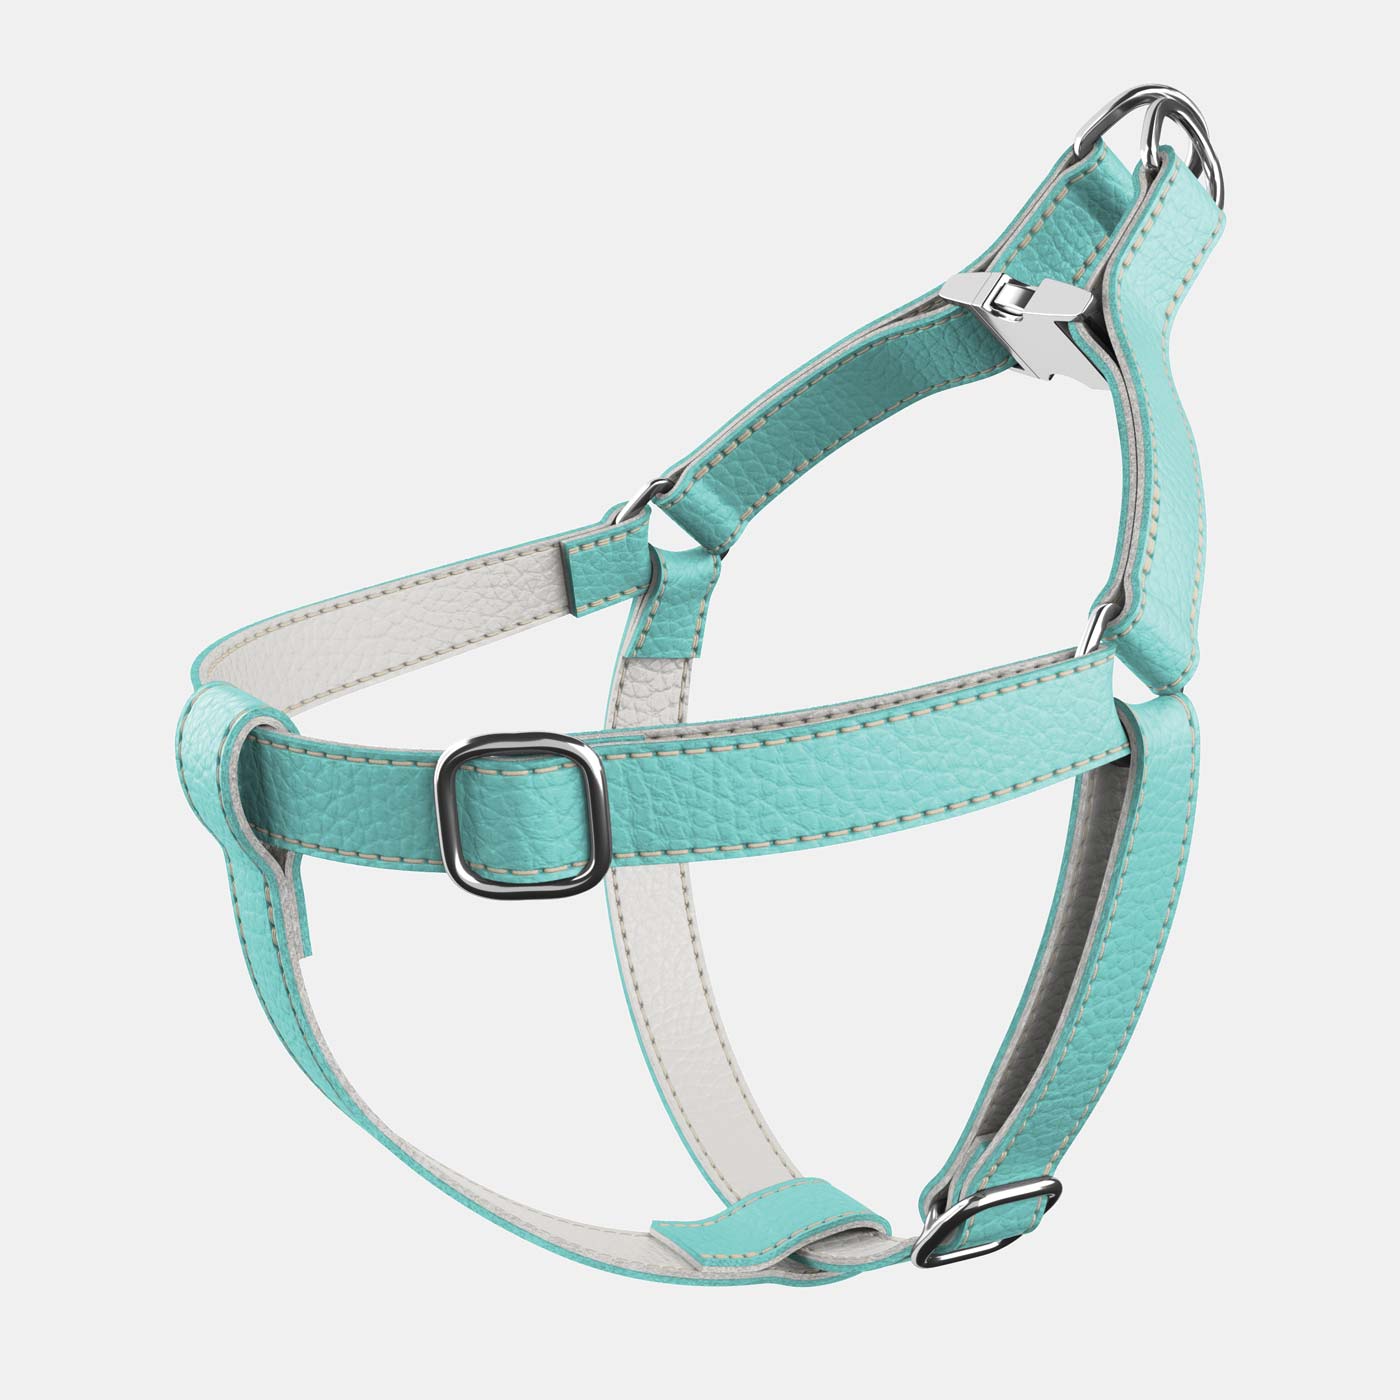 Leather Dog Harness - Light Blue and Off-white